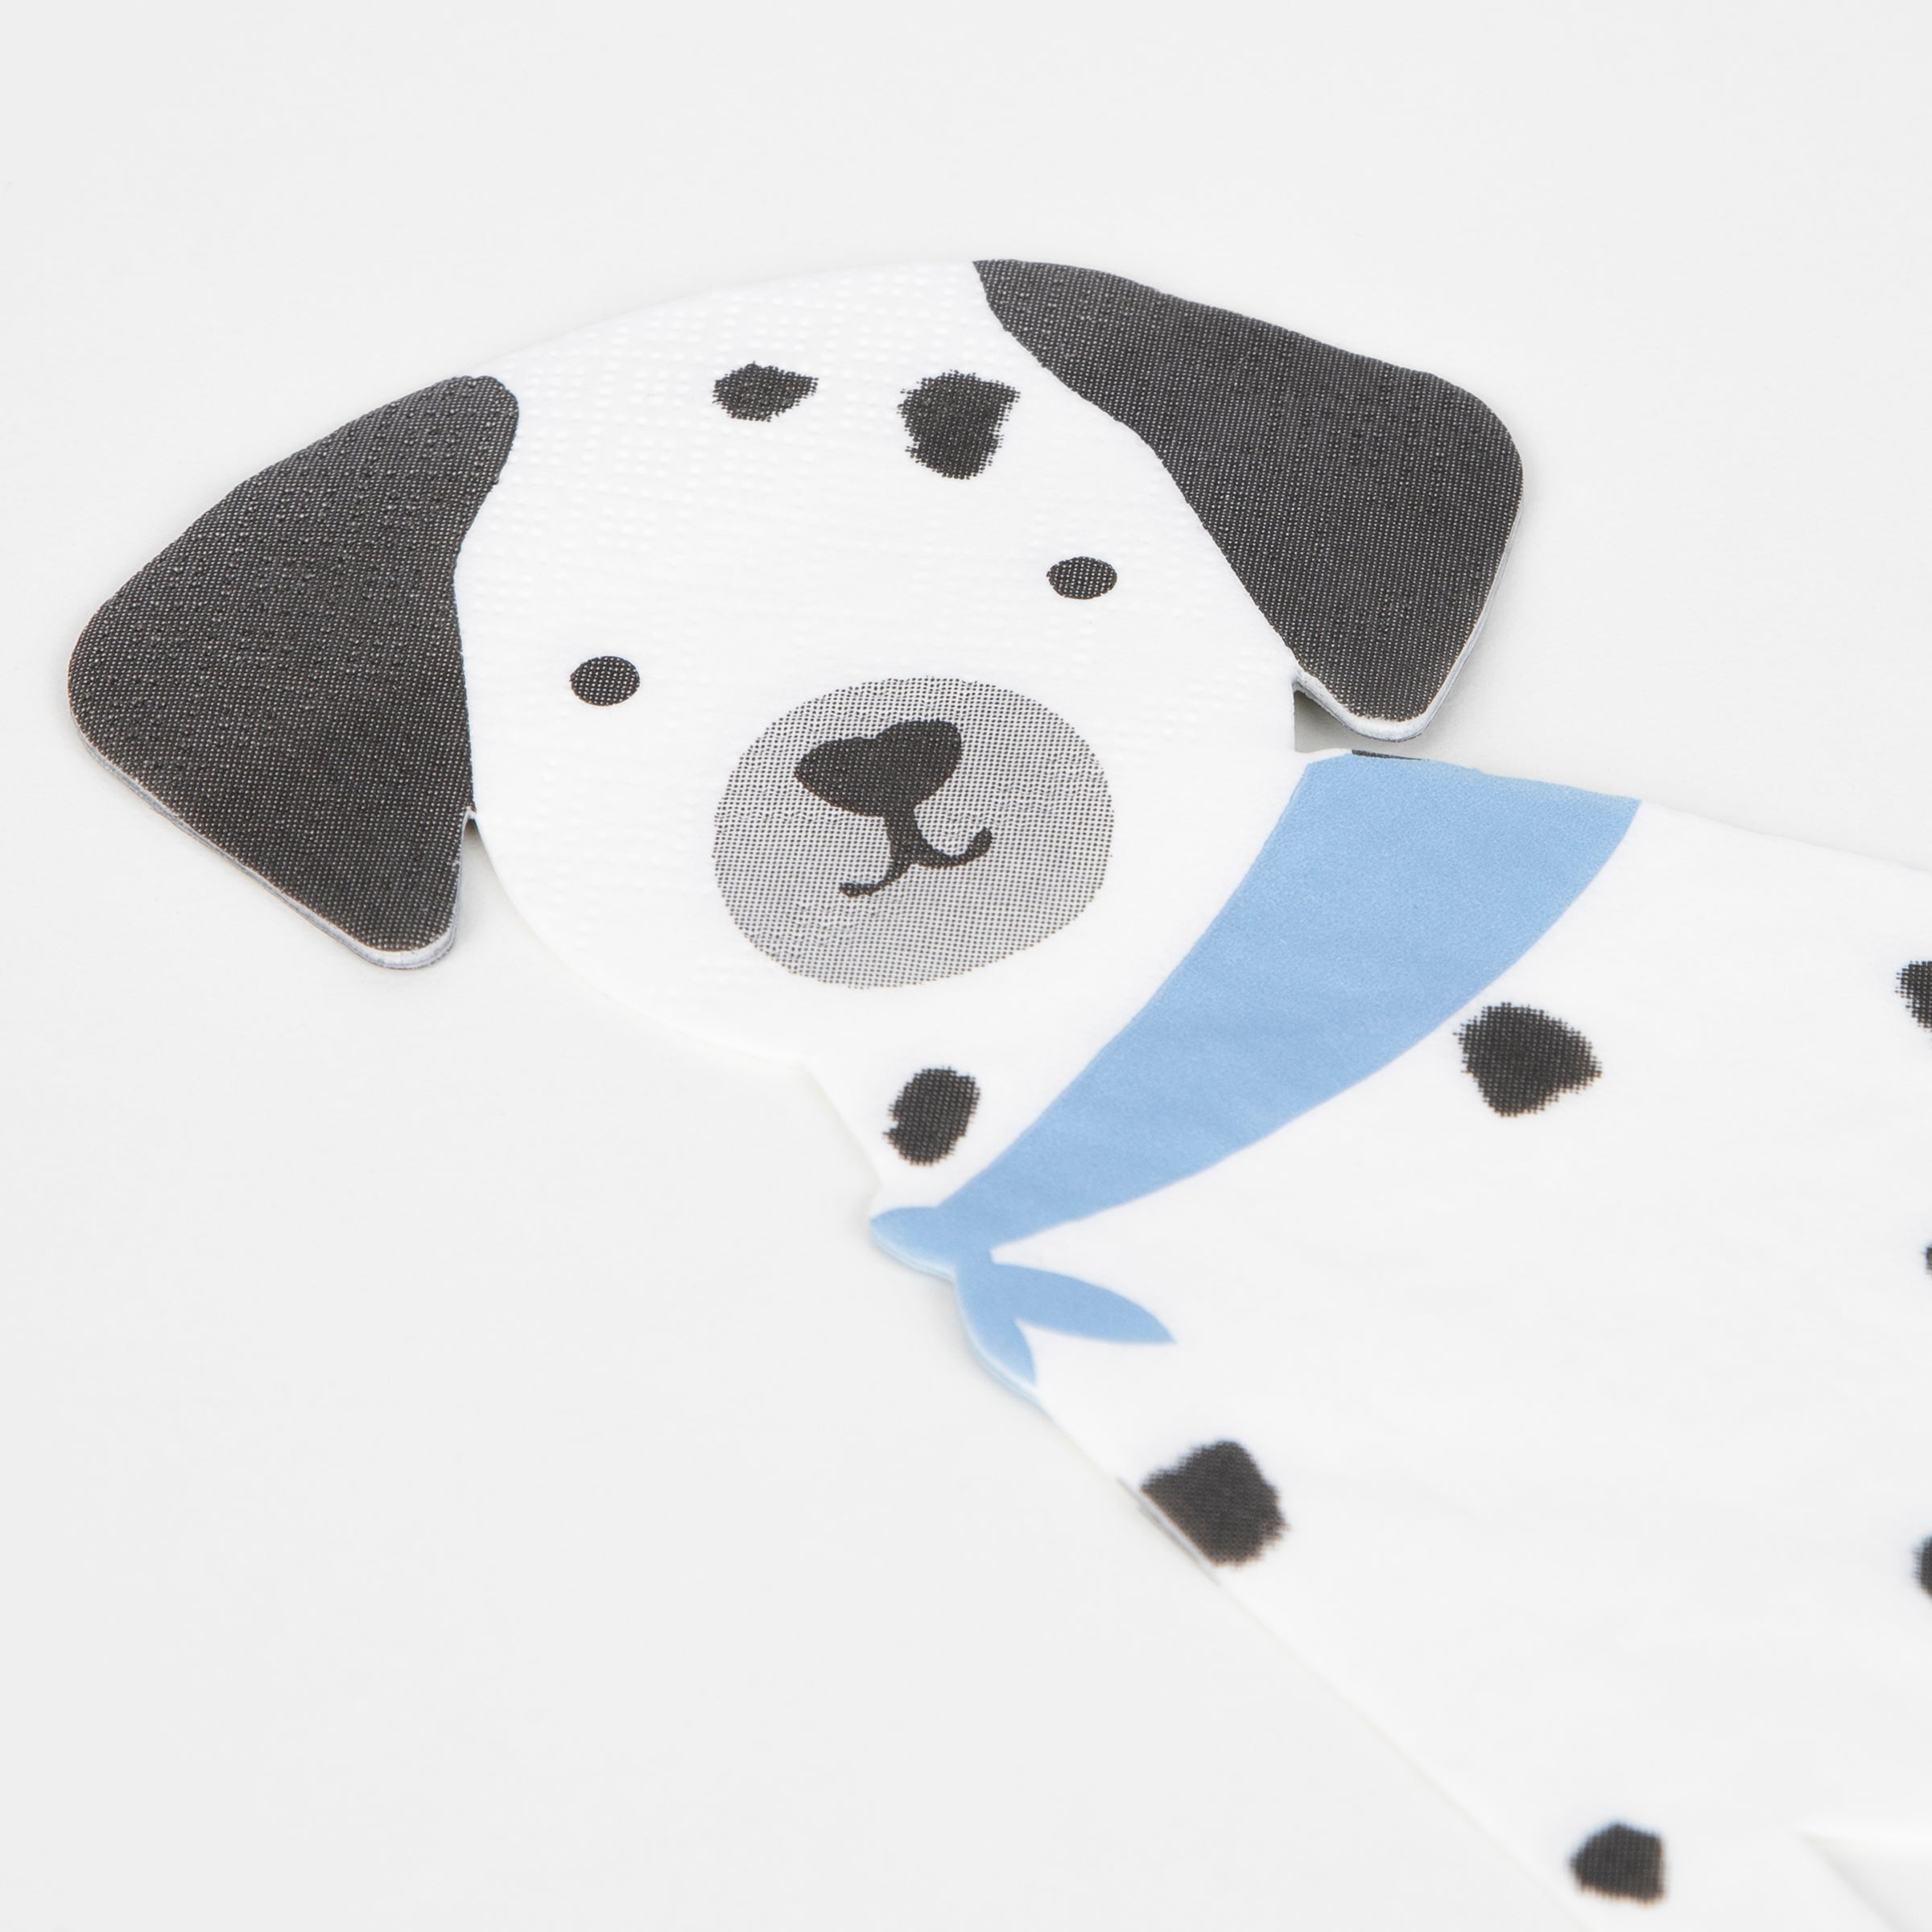 Our party napkins, in the shape of a pup, are ideal for a dog themed birthday party.